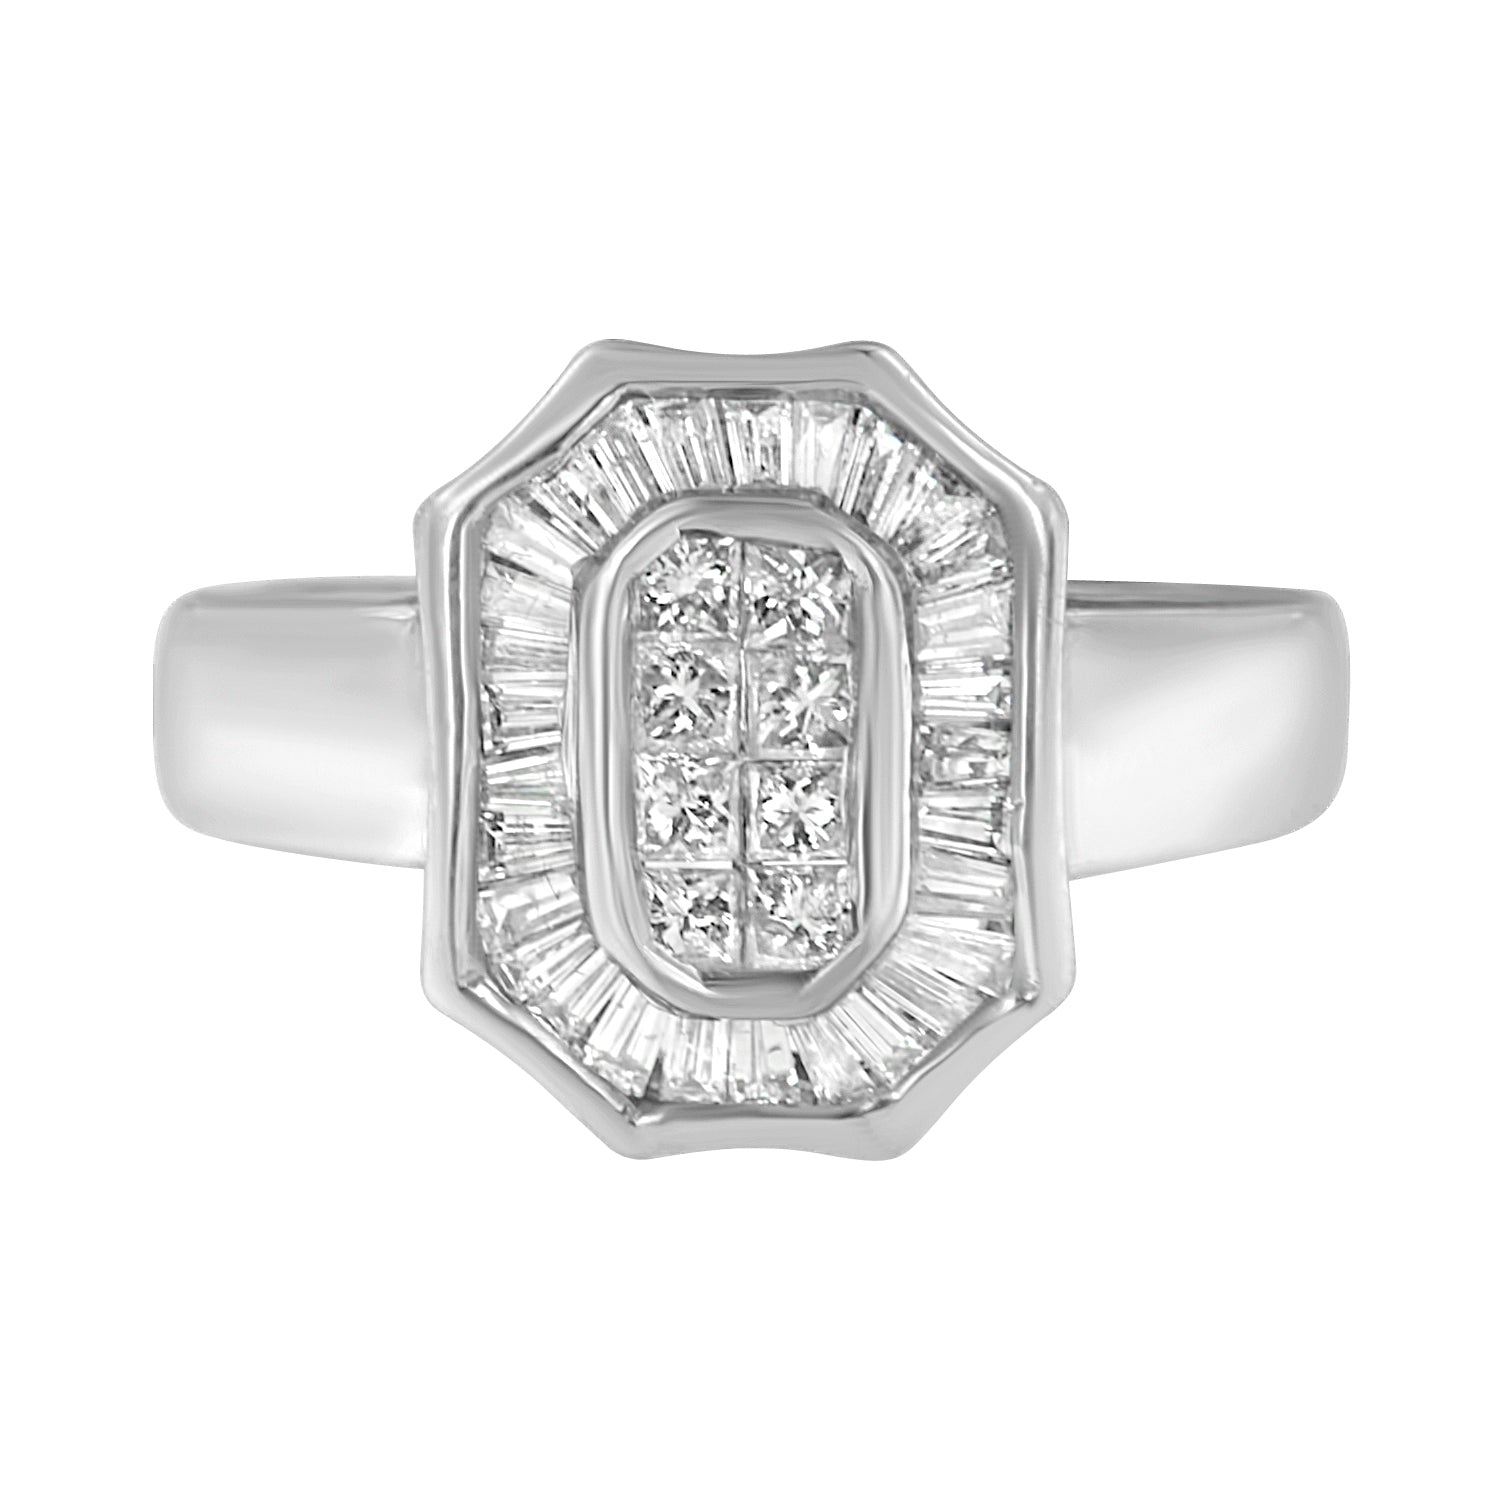 14K White Gold 1.00 Cttw Baguette and Princess-Cut Diamond Cocktail Art Deco Style Ring (H-I Color, SI1-SI2 Clarity) - Size 7 - LinkagejewelrydesignLinkagejewelrydesign